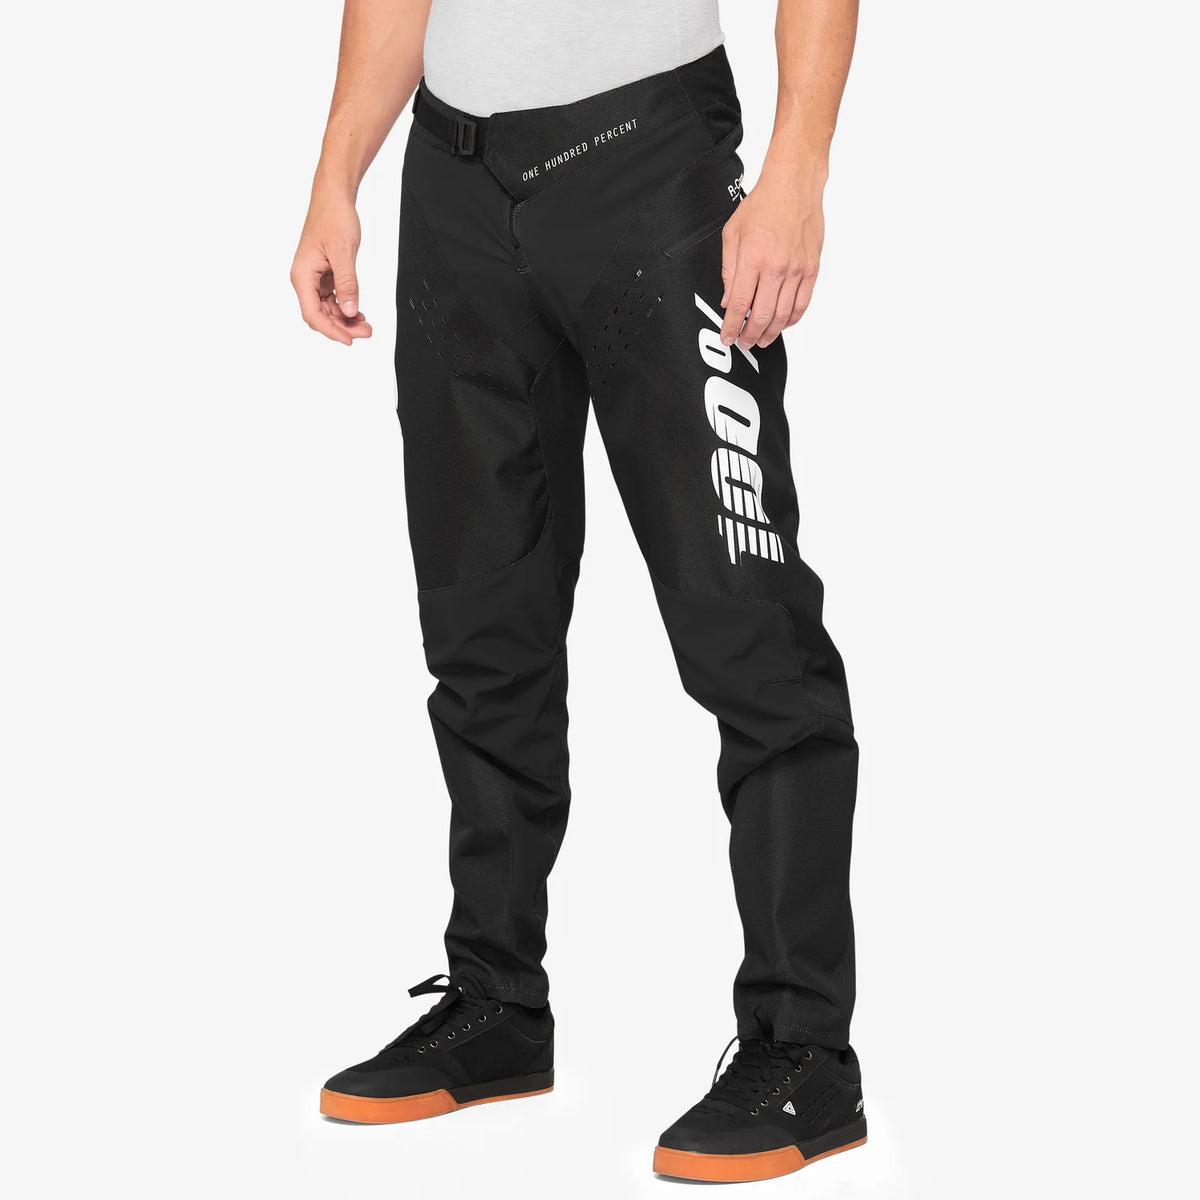 R-CORE YOUTH PANTS